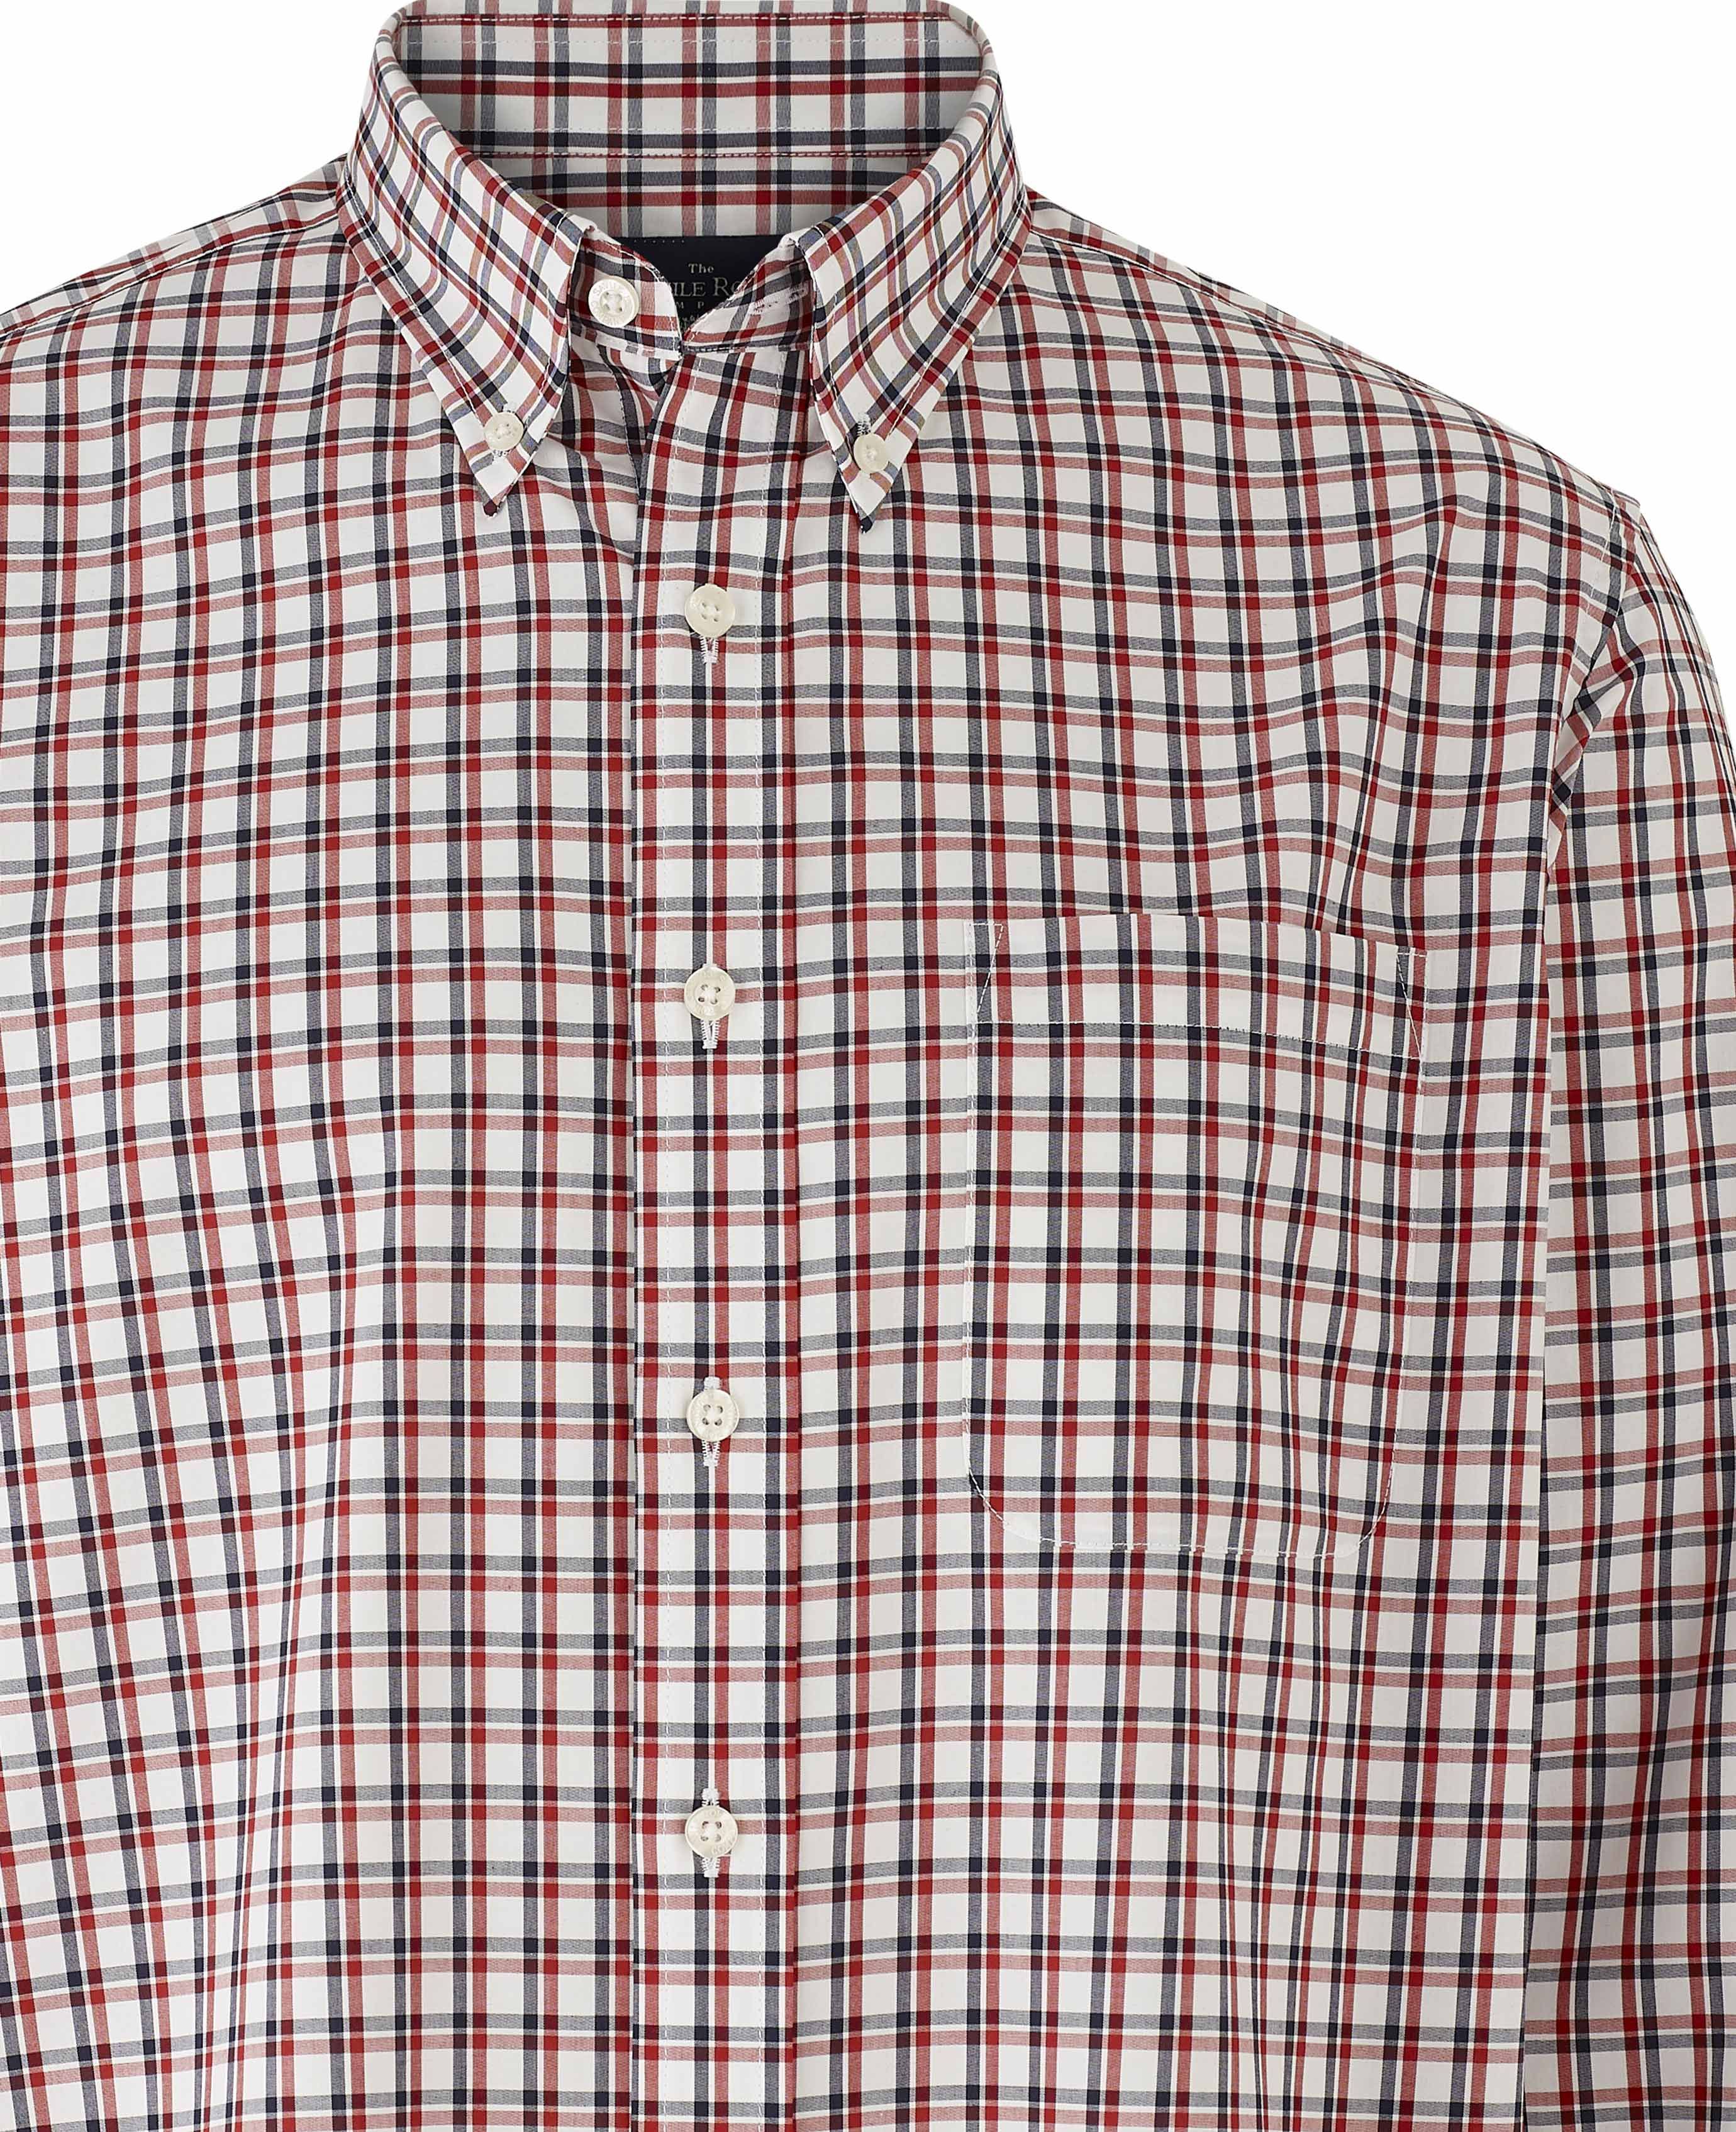 Men’s white, navy and red check button-down casual shirt | Savile Row Co